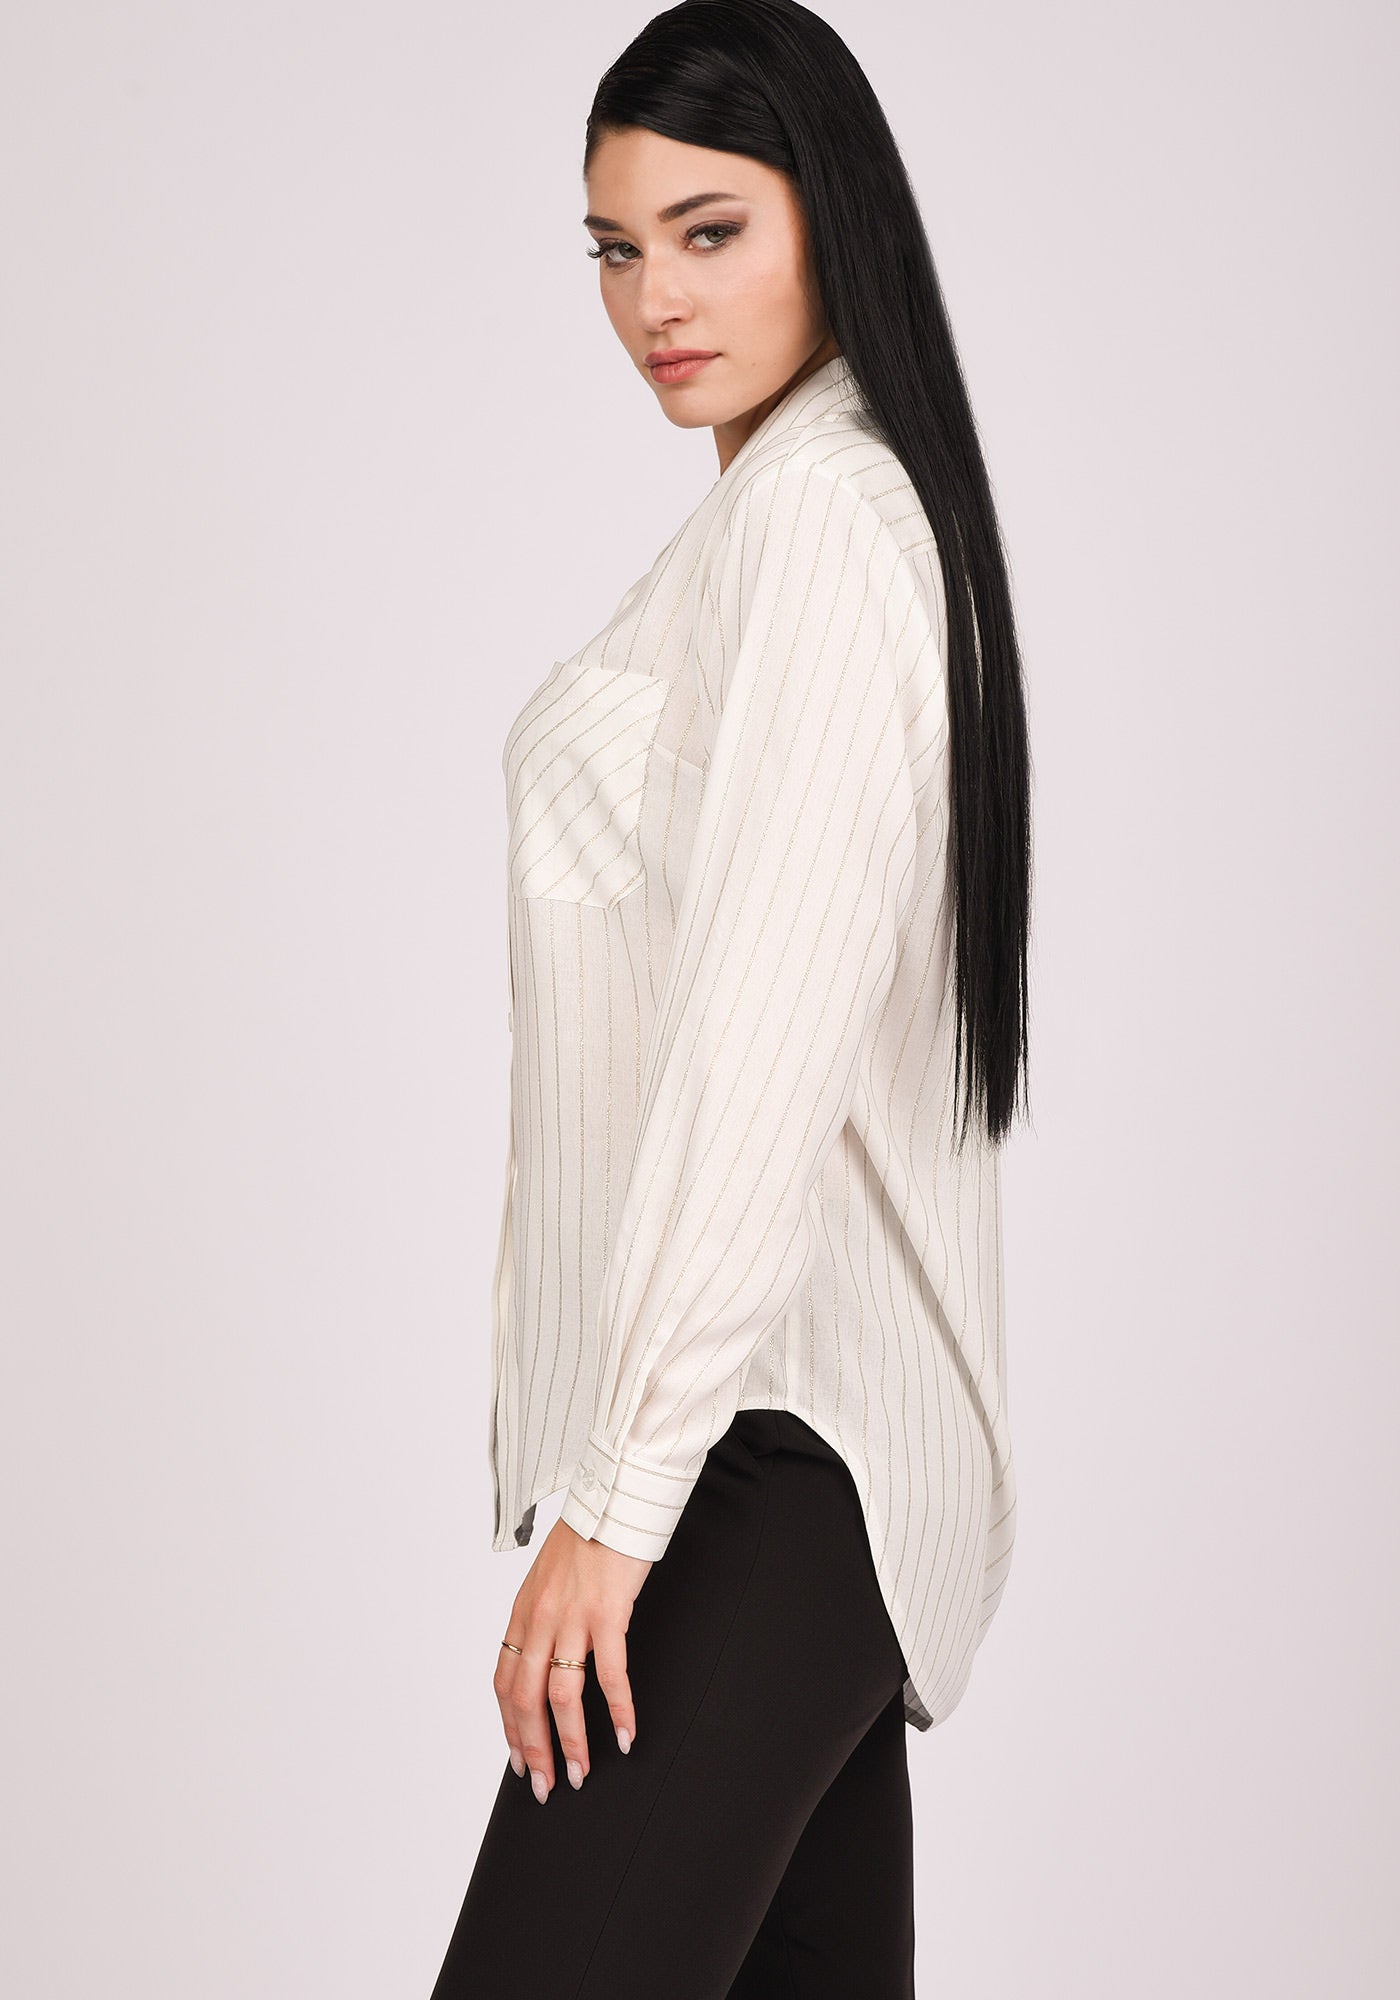 Women's Relaxed fit Shirt in Silver Pinstripe White